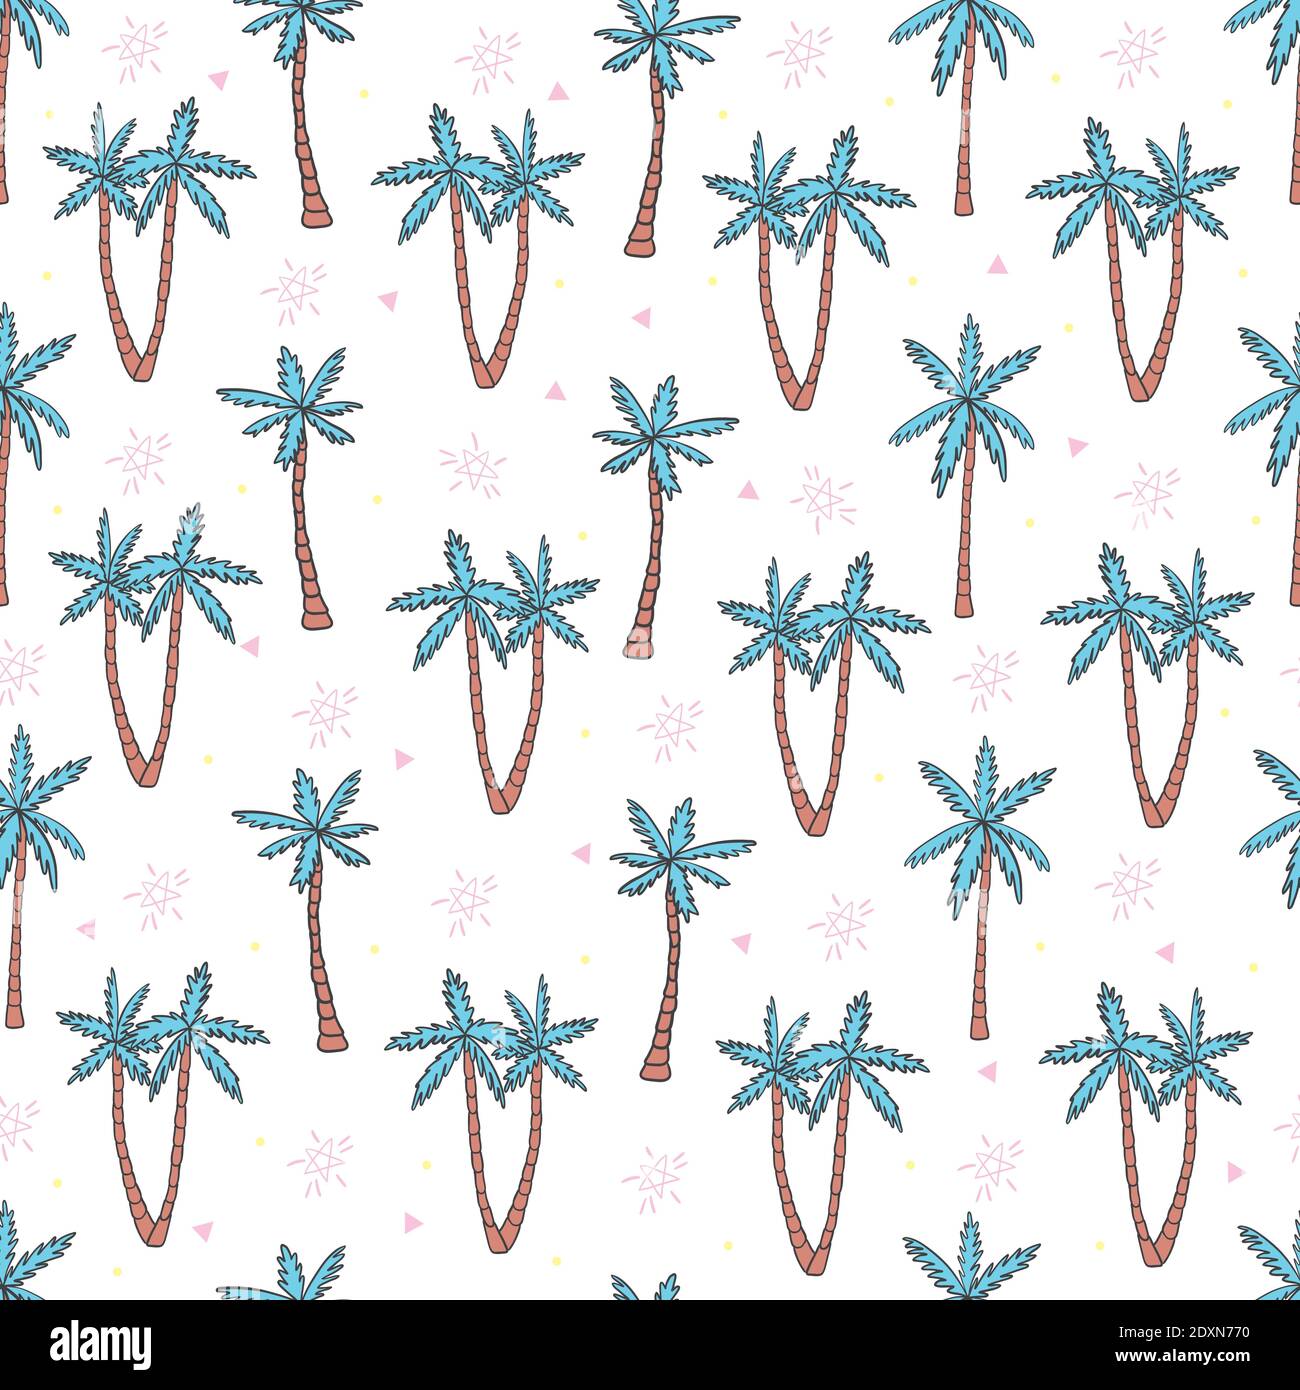 Vector seamless pattern with palm trees Stock Vector